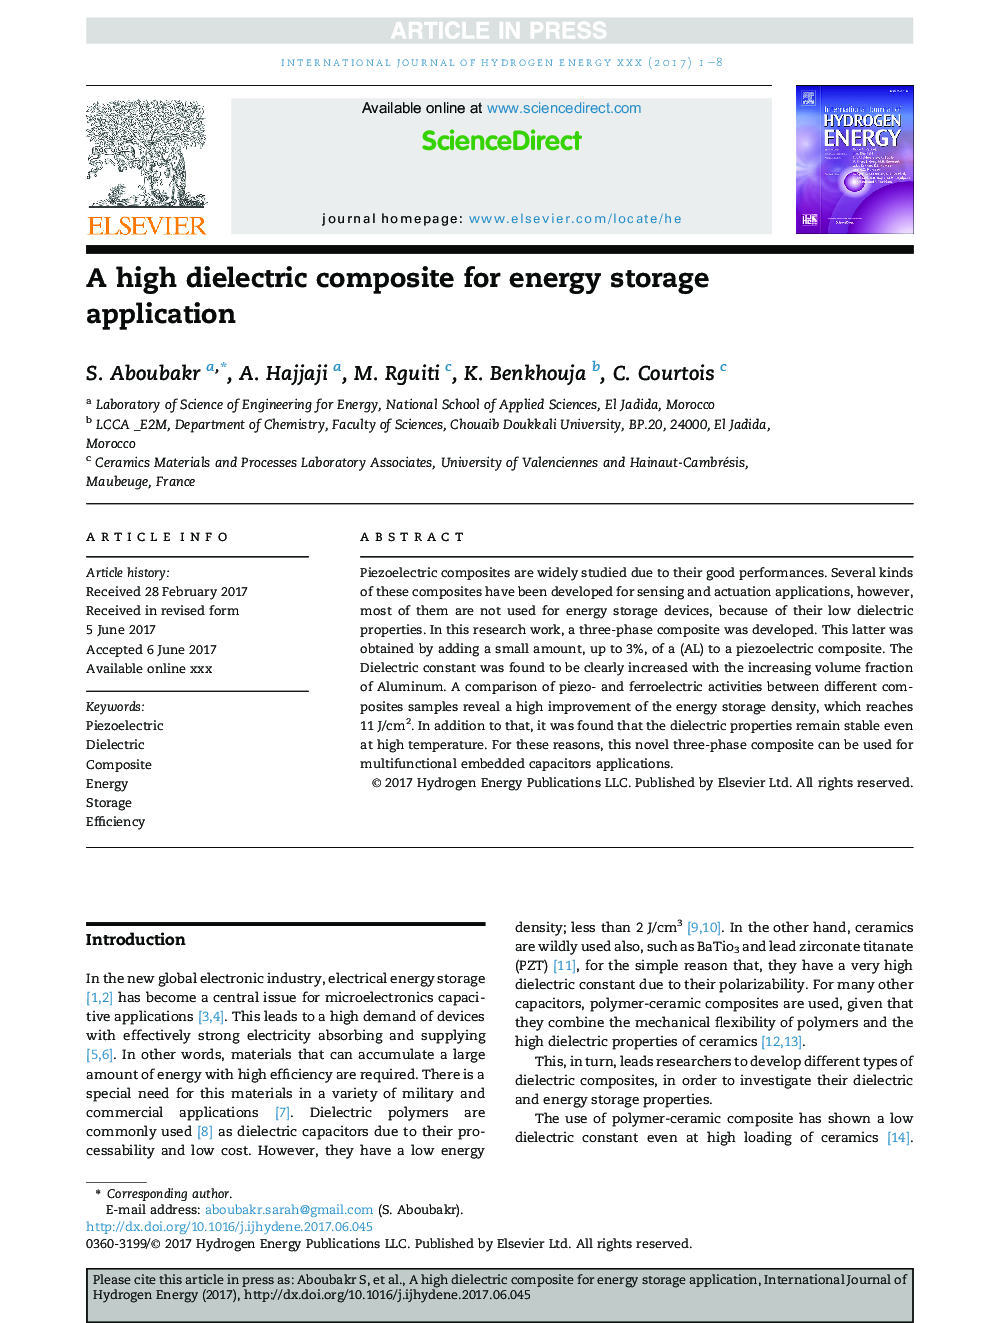 A high dielectric composite for energy storage application